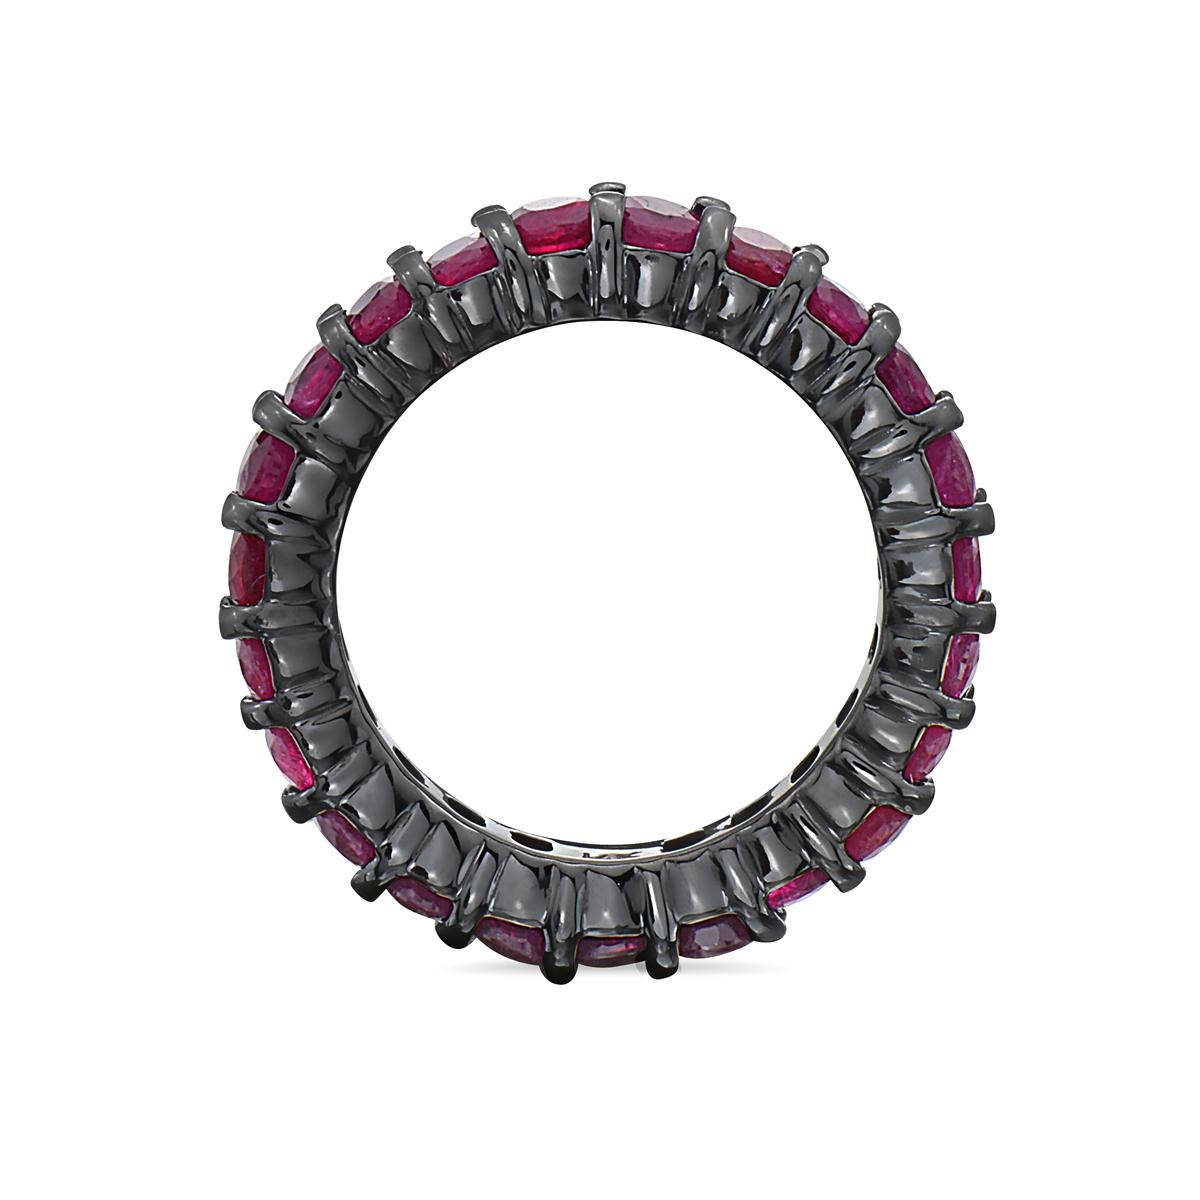 This 14K eternity band is dipped in black rhodium featuring 21 oval cut rubies weighing 4.5 carats carats. Size 6. 

Viewings available in our NYC showroom by appointment.